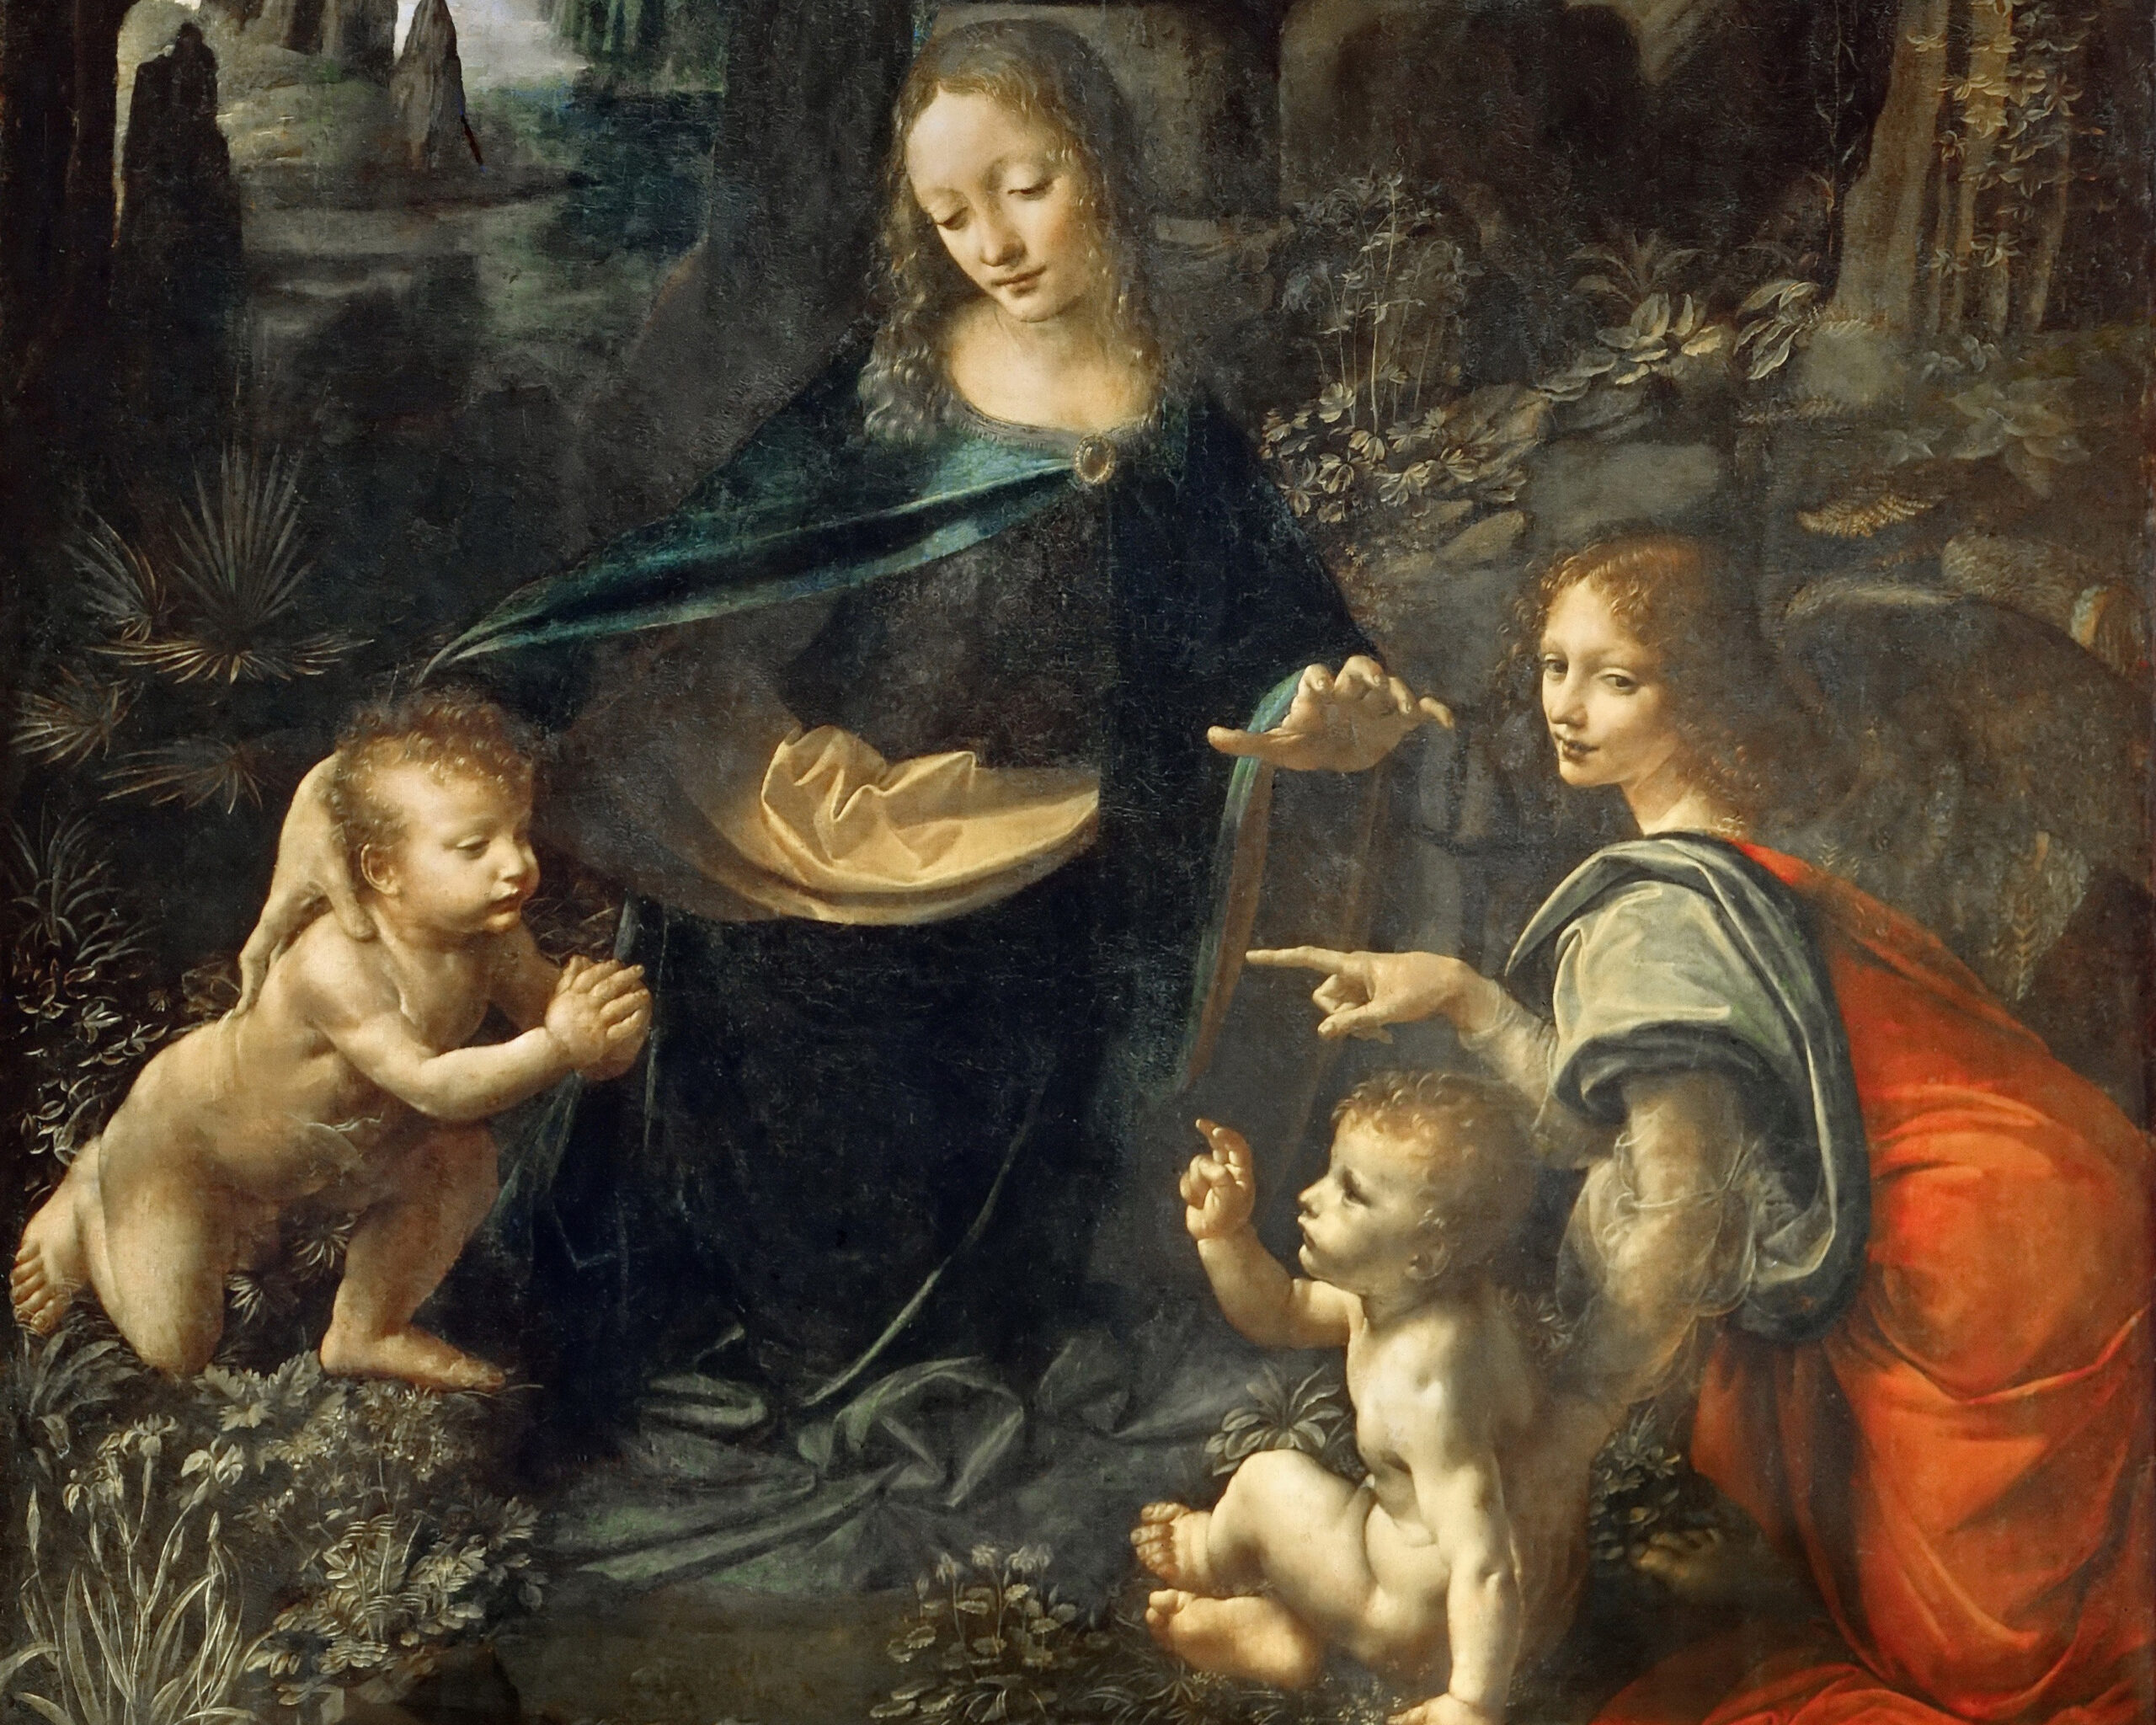 Uncover the timeless wisdom of St. Alphonsus Liguori's "The Glories of Mary." This profound work reveals the unfathomable love of the Blessed Mother for her spiritual children, inspiring renewed trust and devotion.